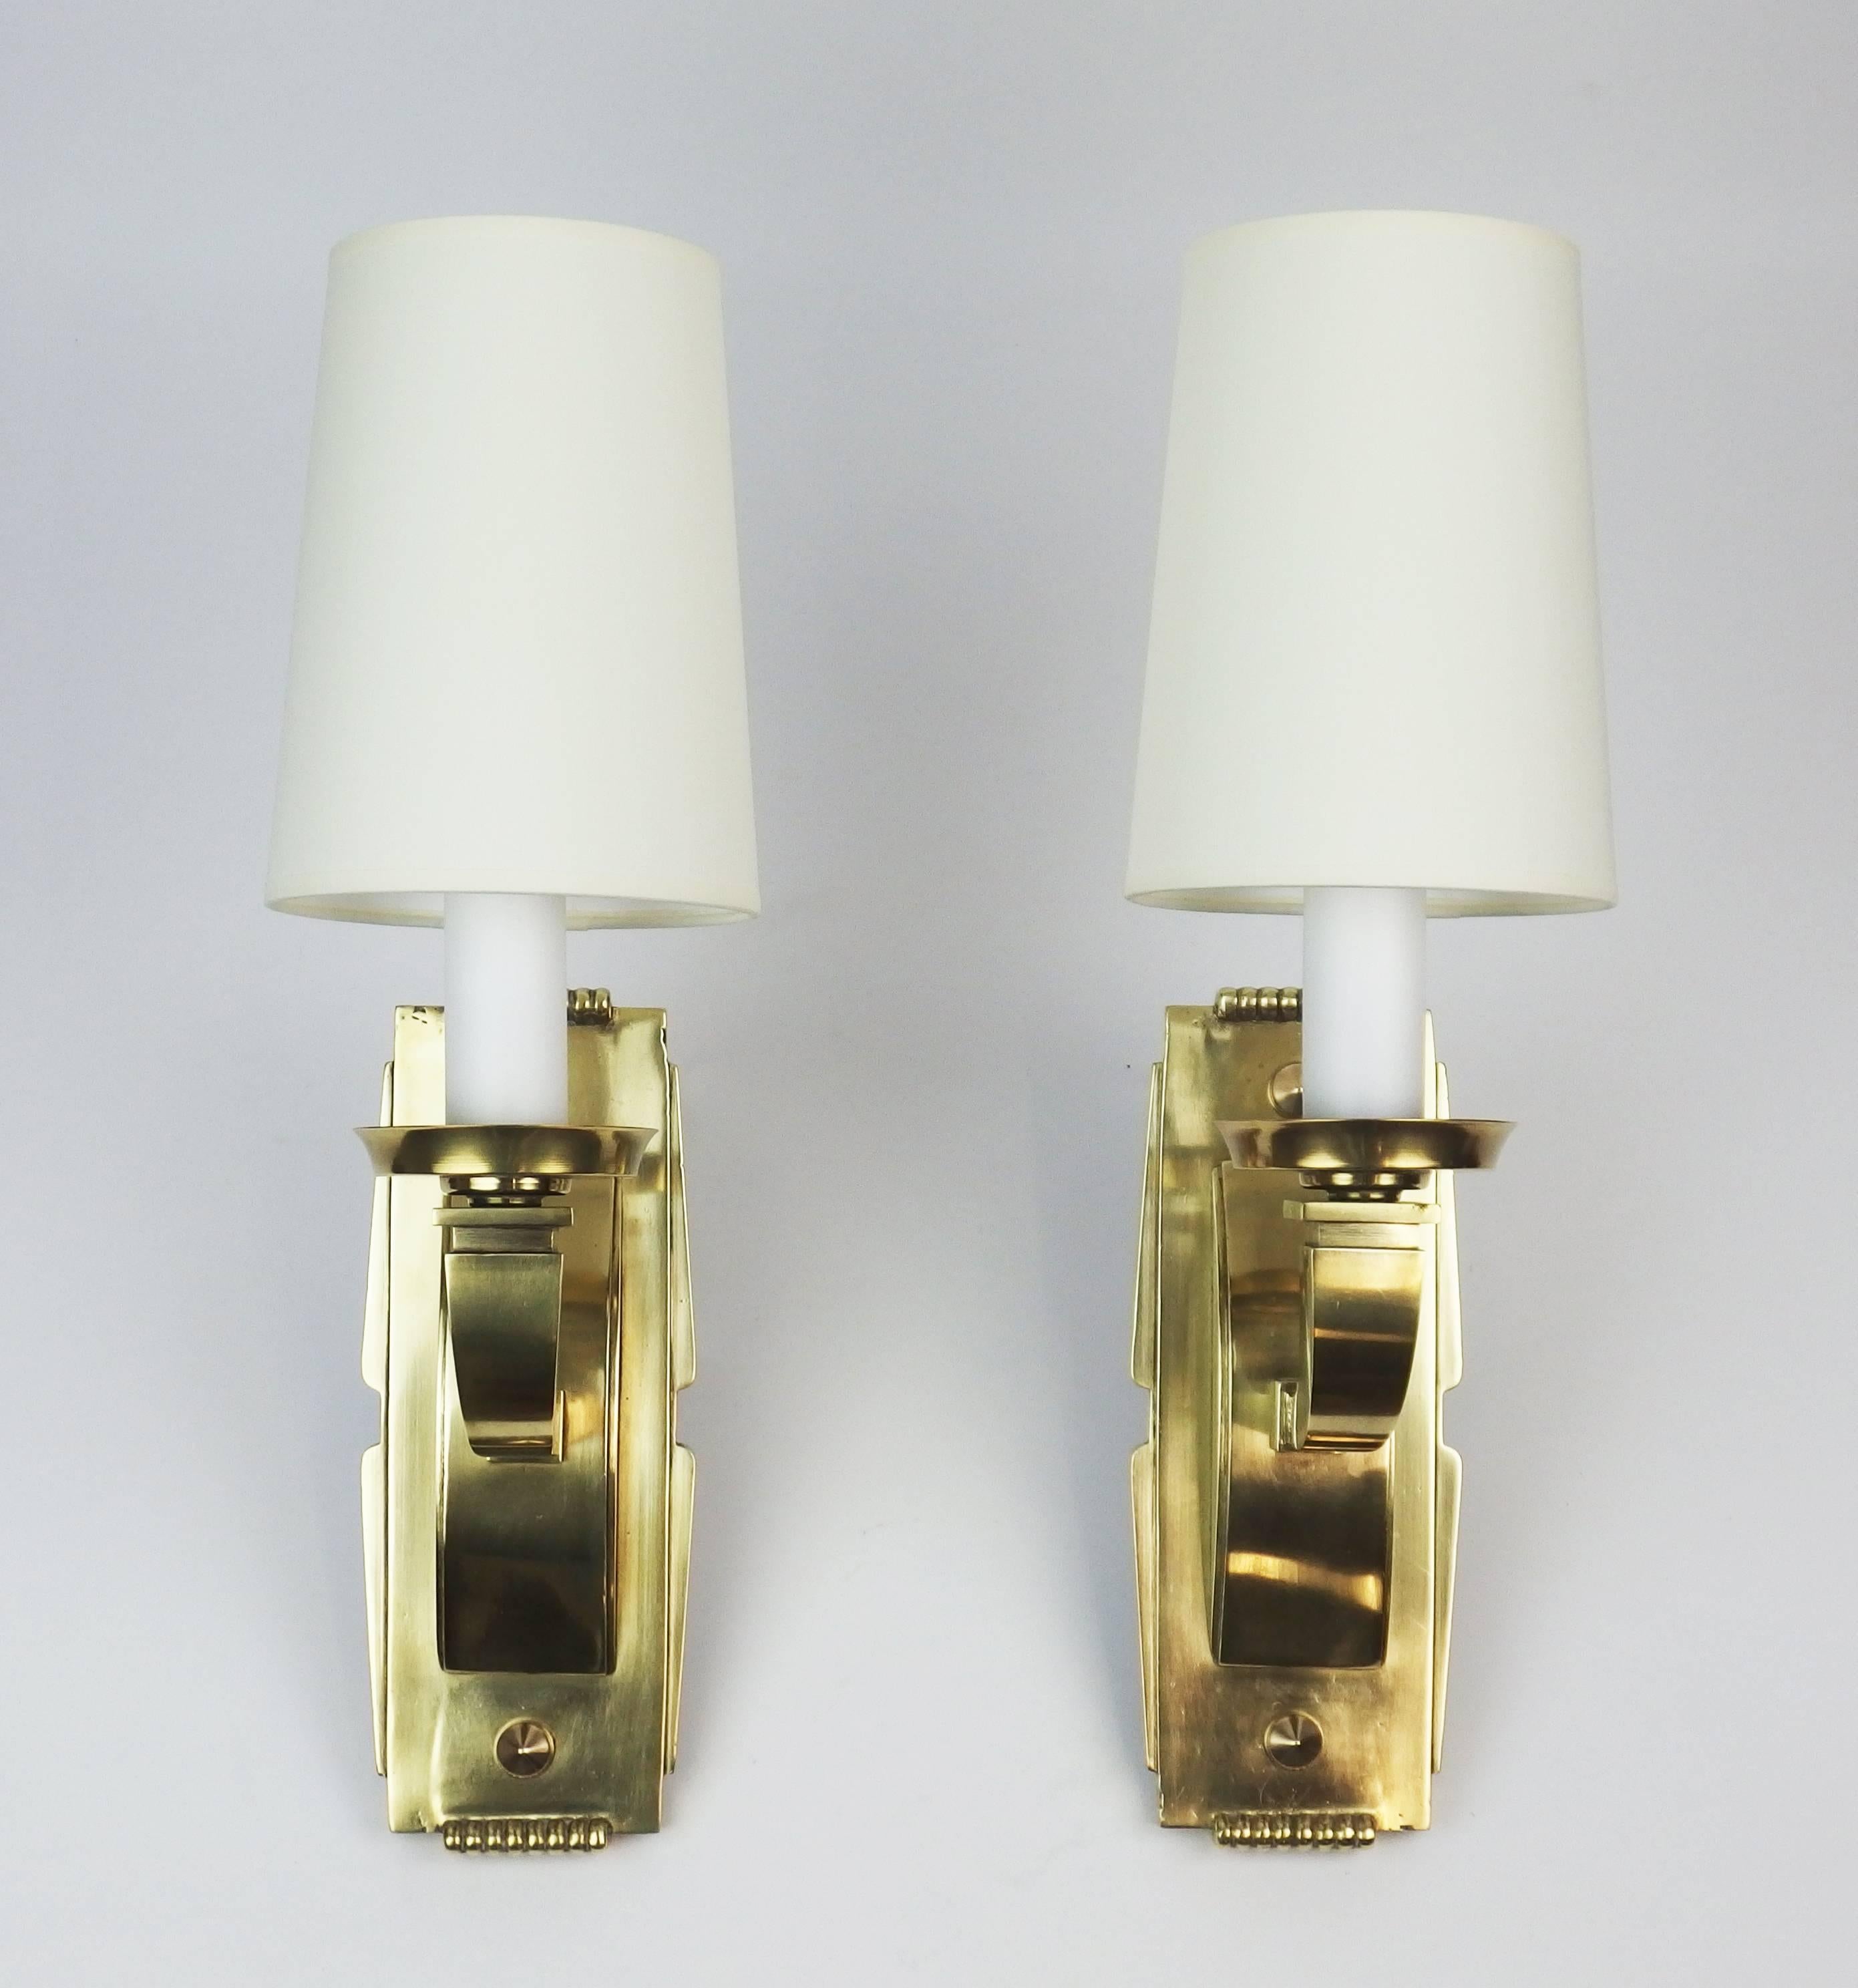 A pair of bronze and brass Art Deco sconces.
Height of sconce without the shade: 14.5 inches.
 